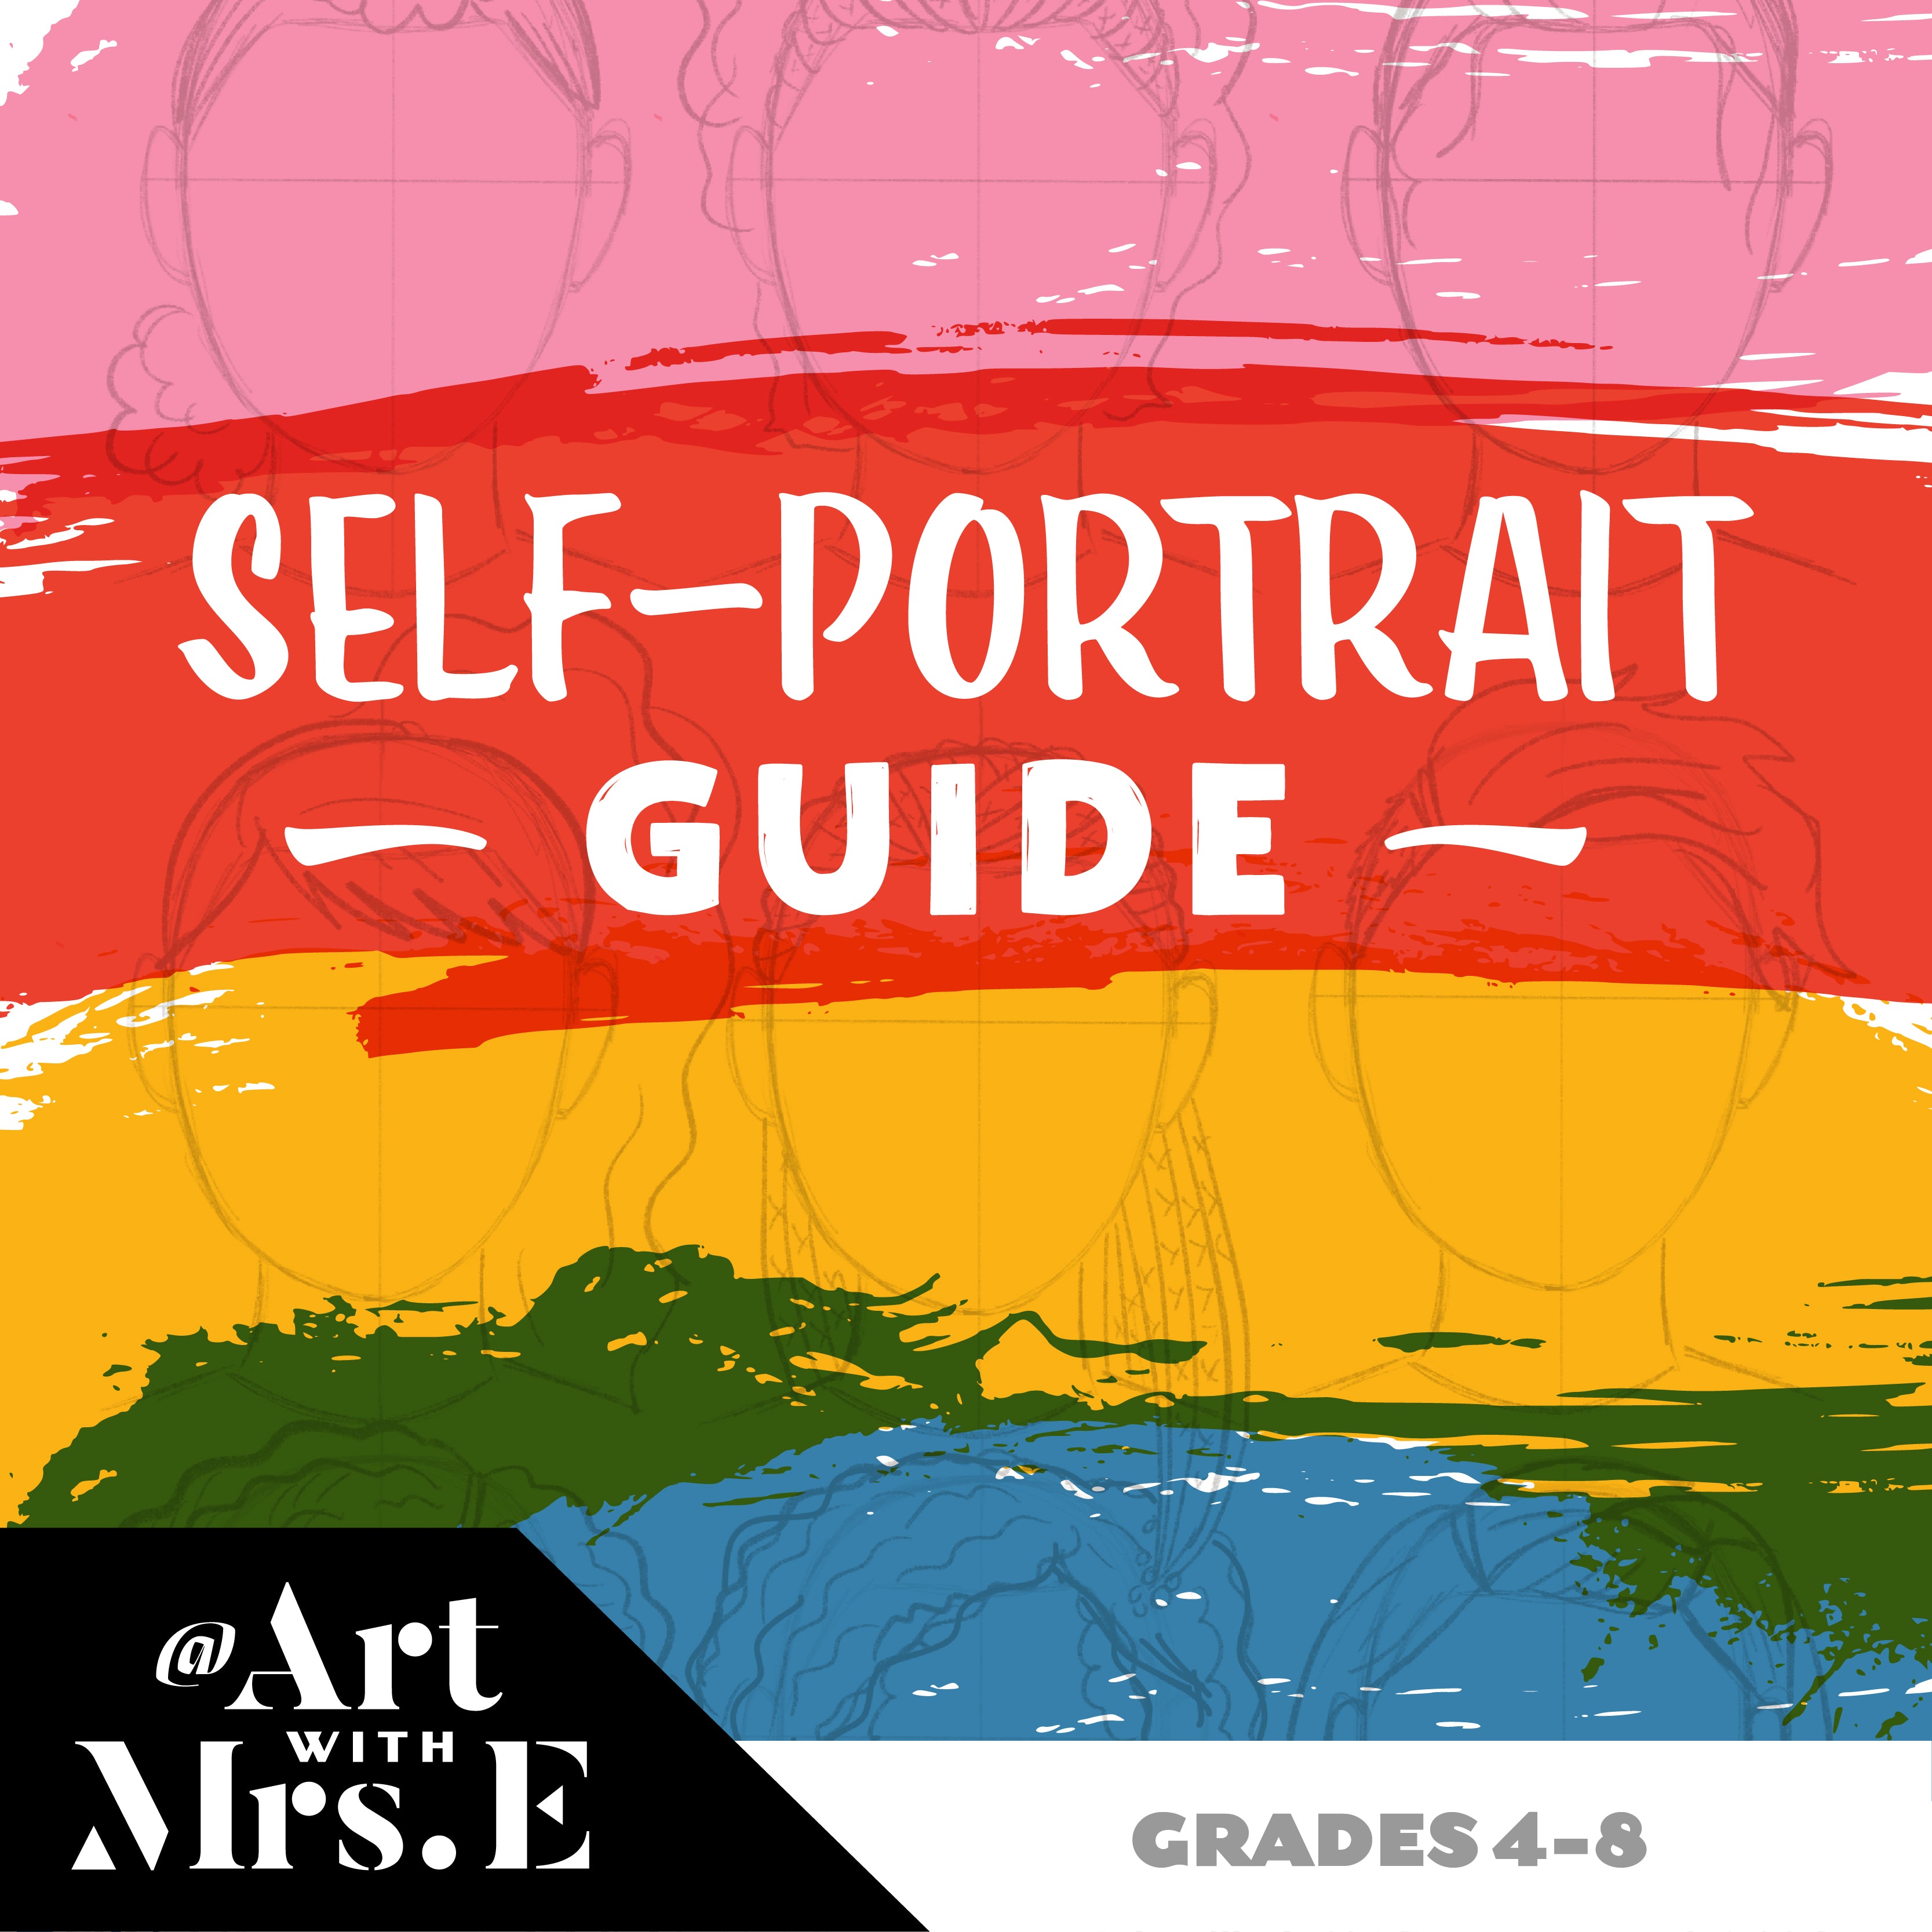 Folk Art Portraits: Celebrate Influential and Inspiring People – Art With  Mrs. E